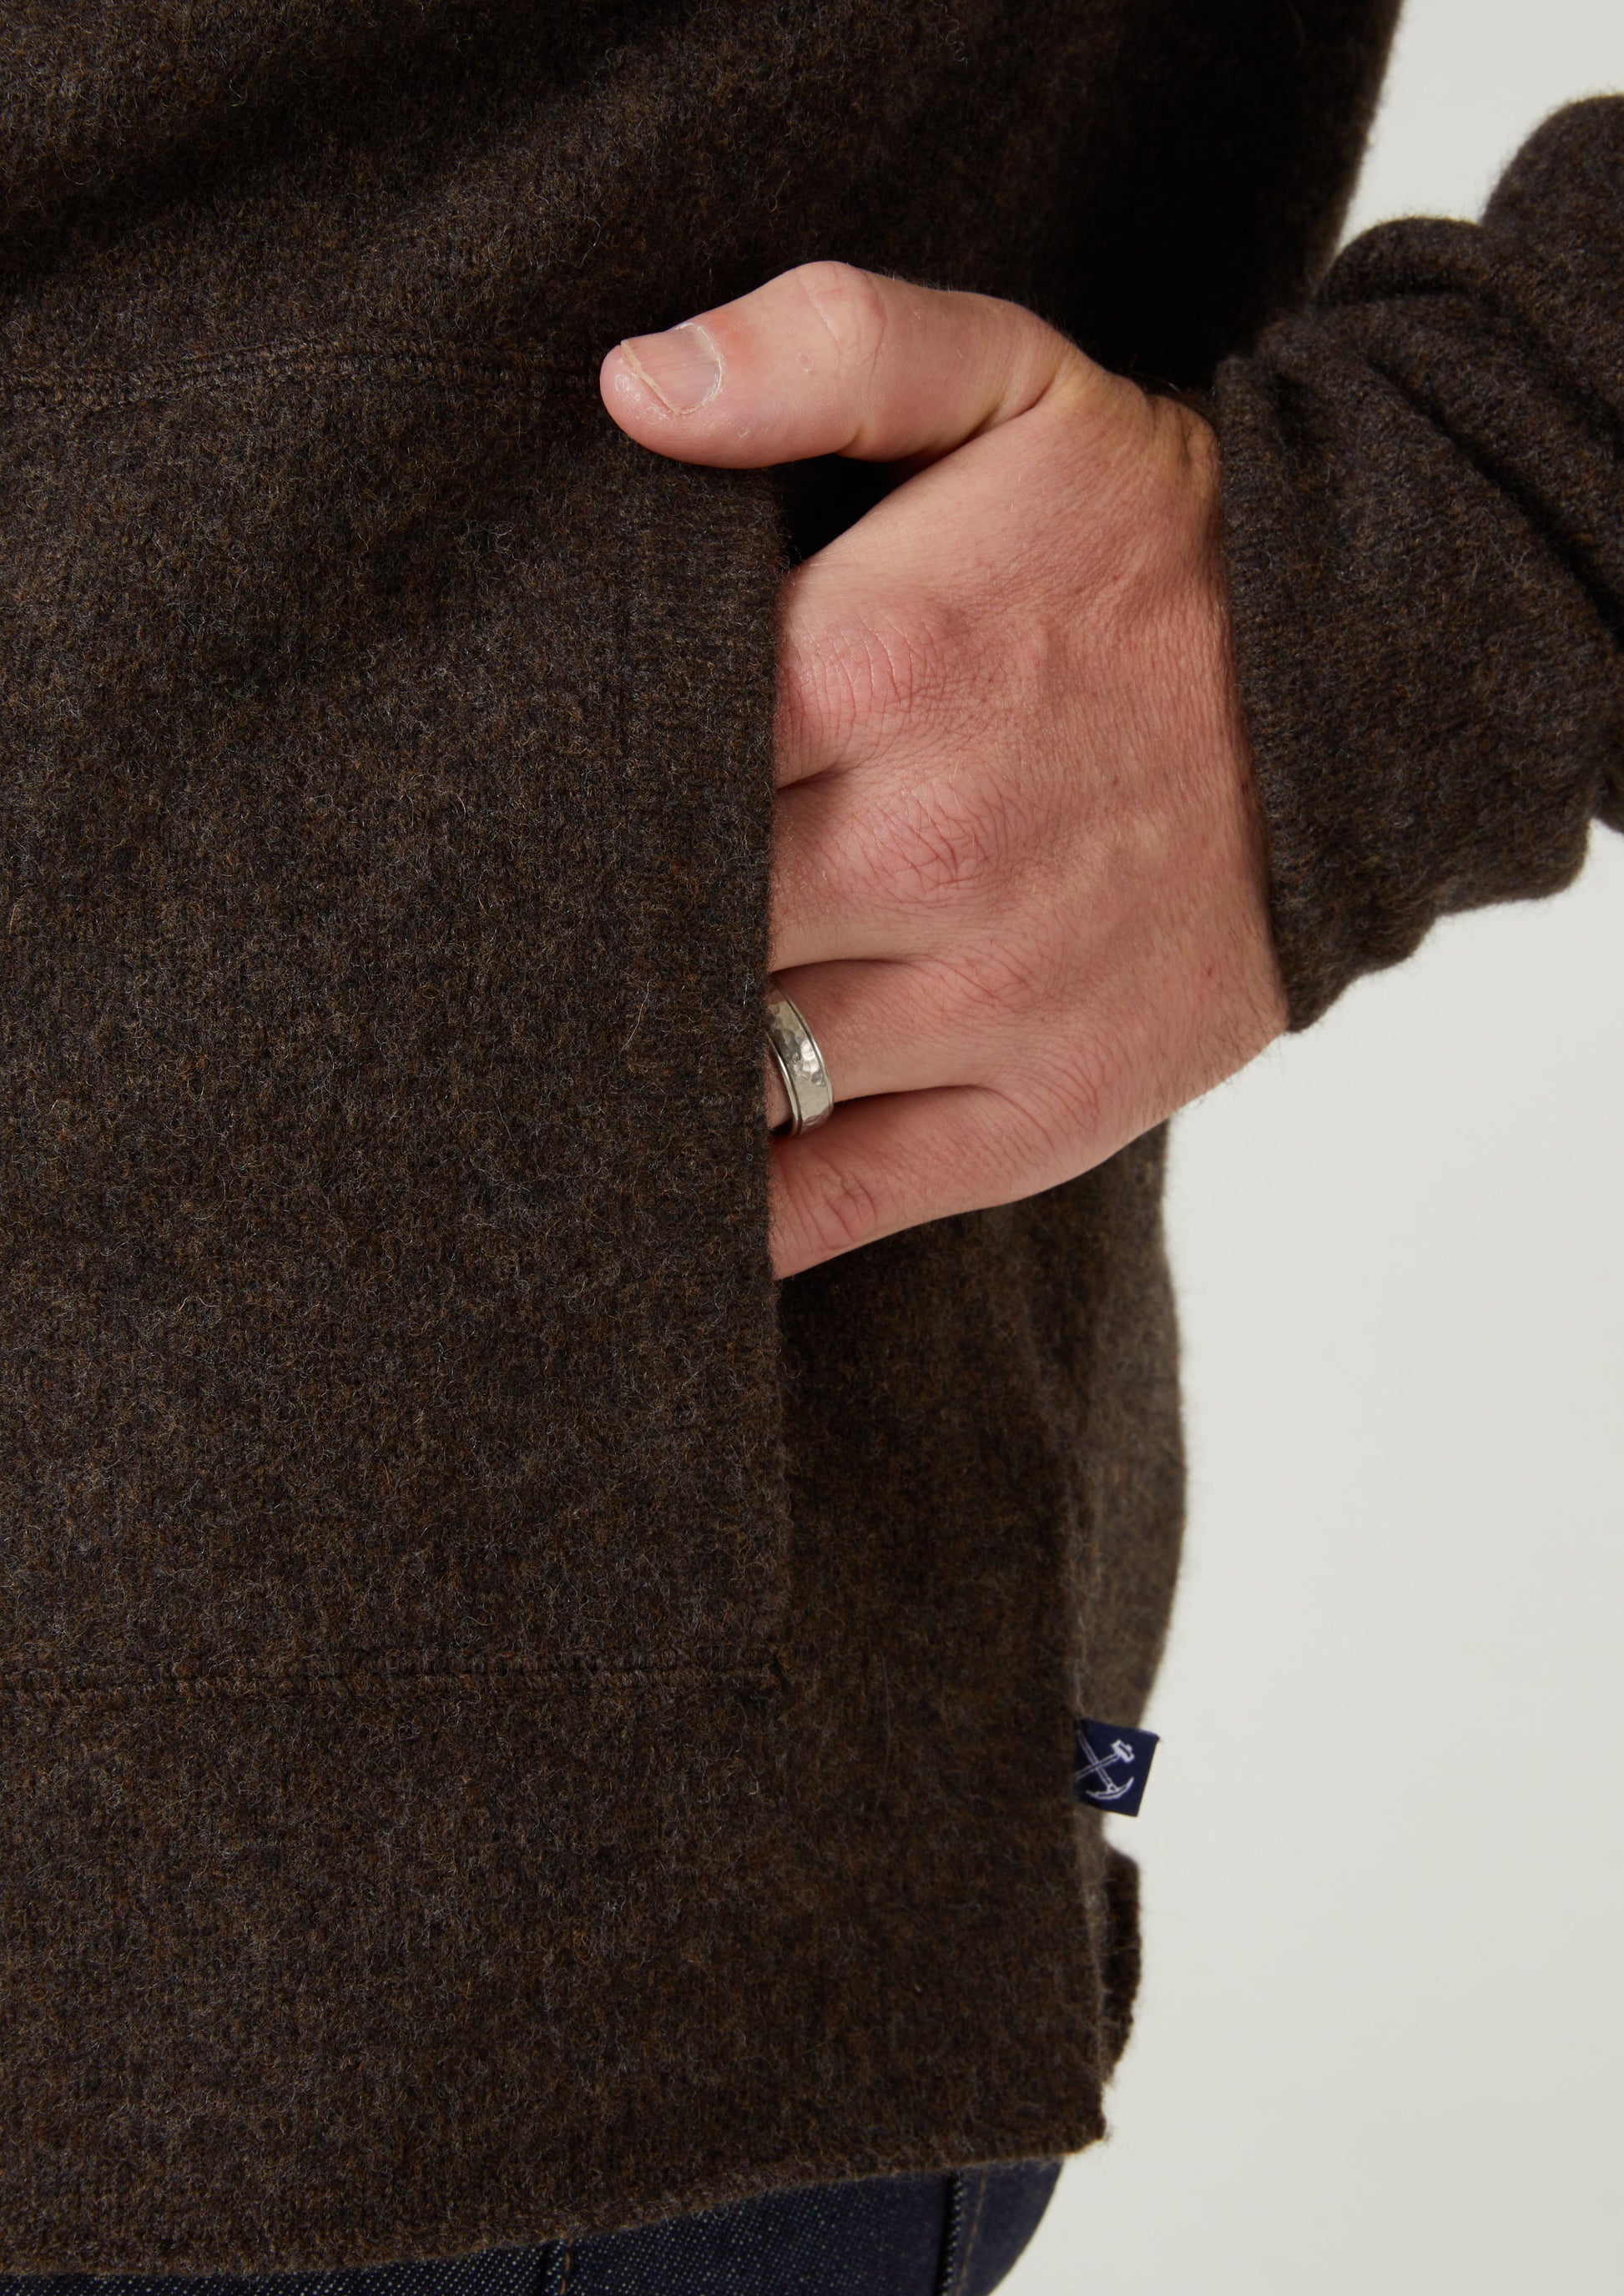 Ferndale Men's Knitted Lambswool Shirt In Cocoa